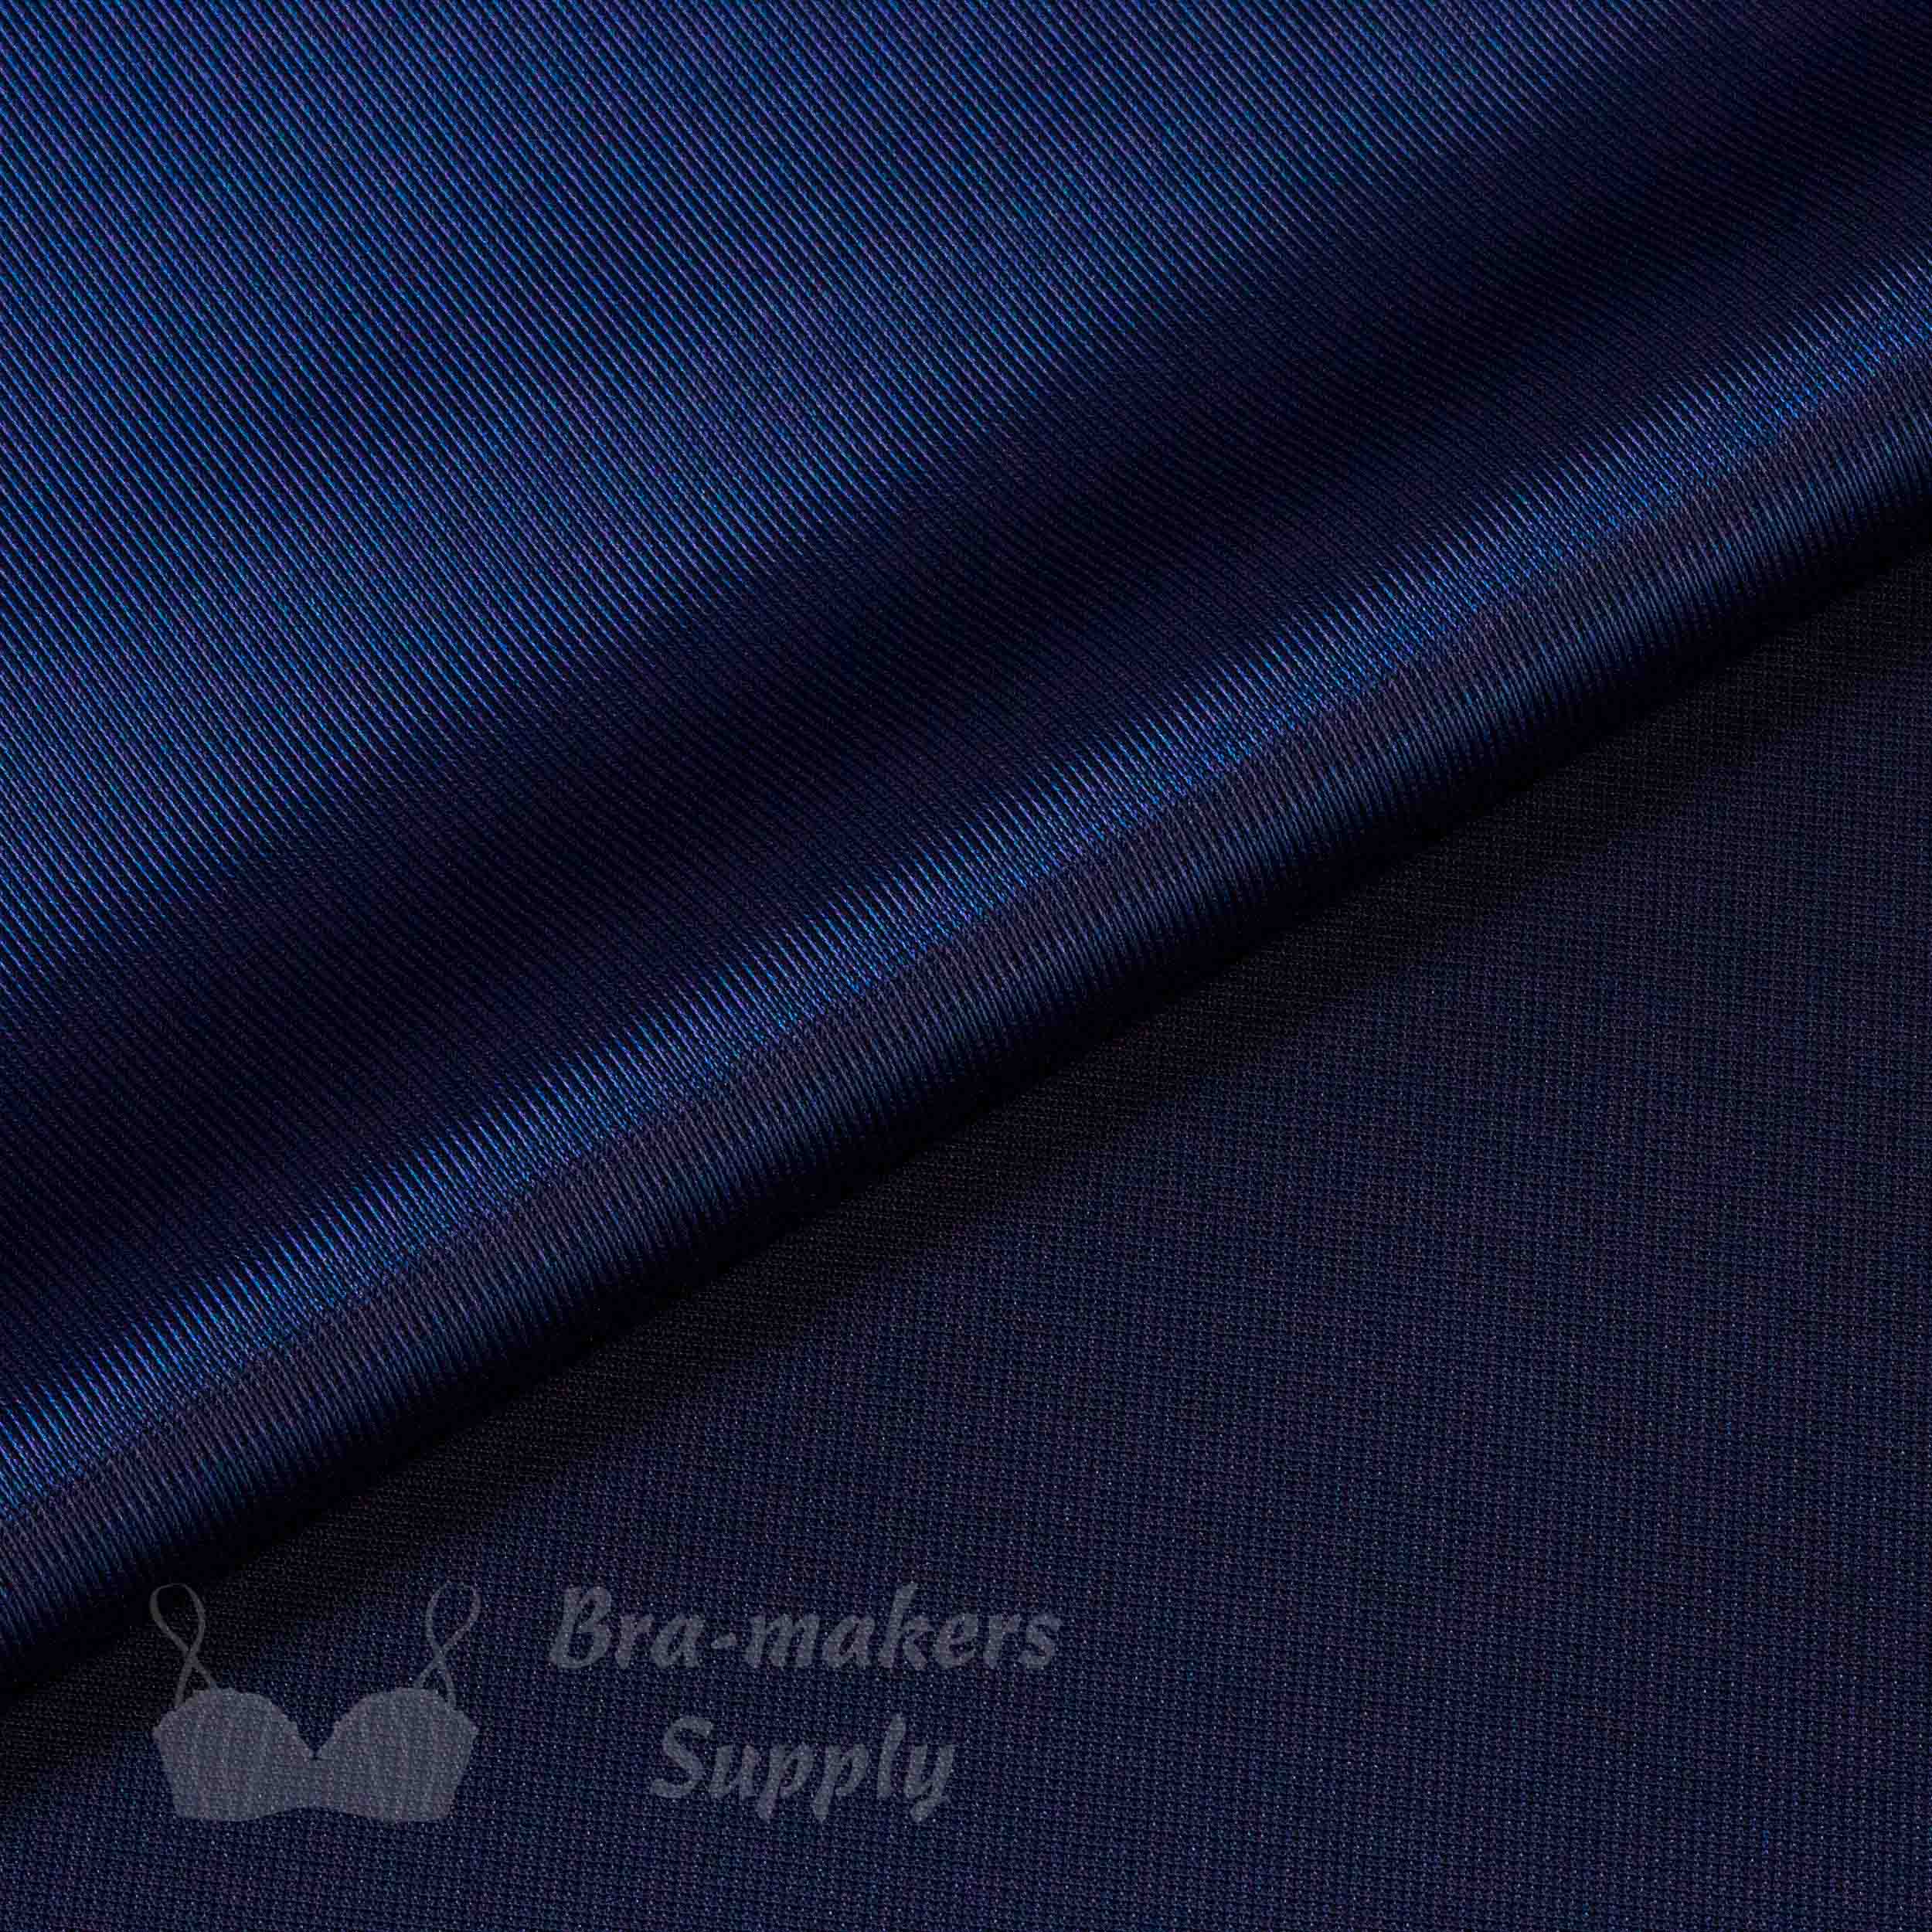 Bra/Lingerie Making - Cup Fabric - Tricot - Duoplex 160gsm - Patterned  Sheen - Orla - NAVY Multi